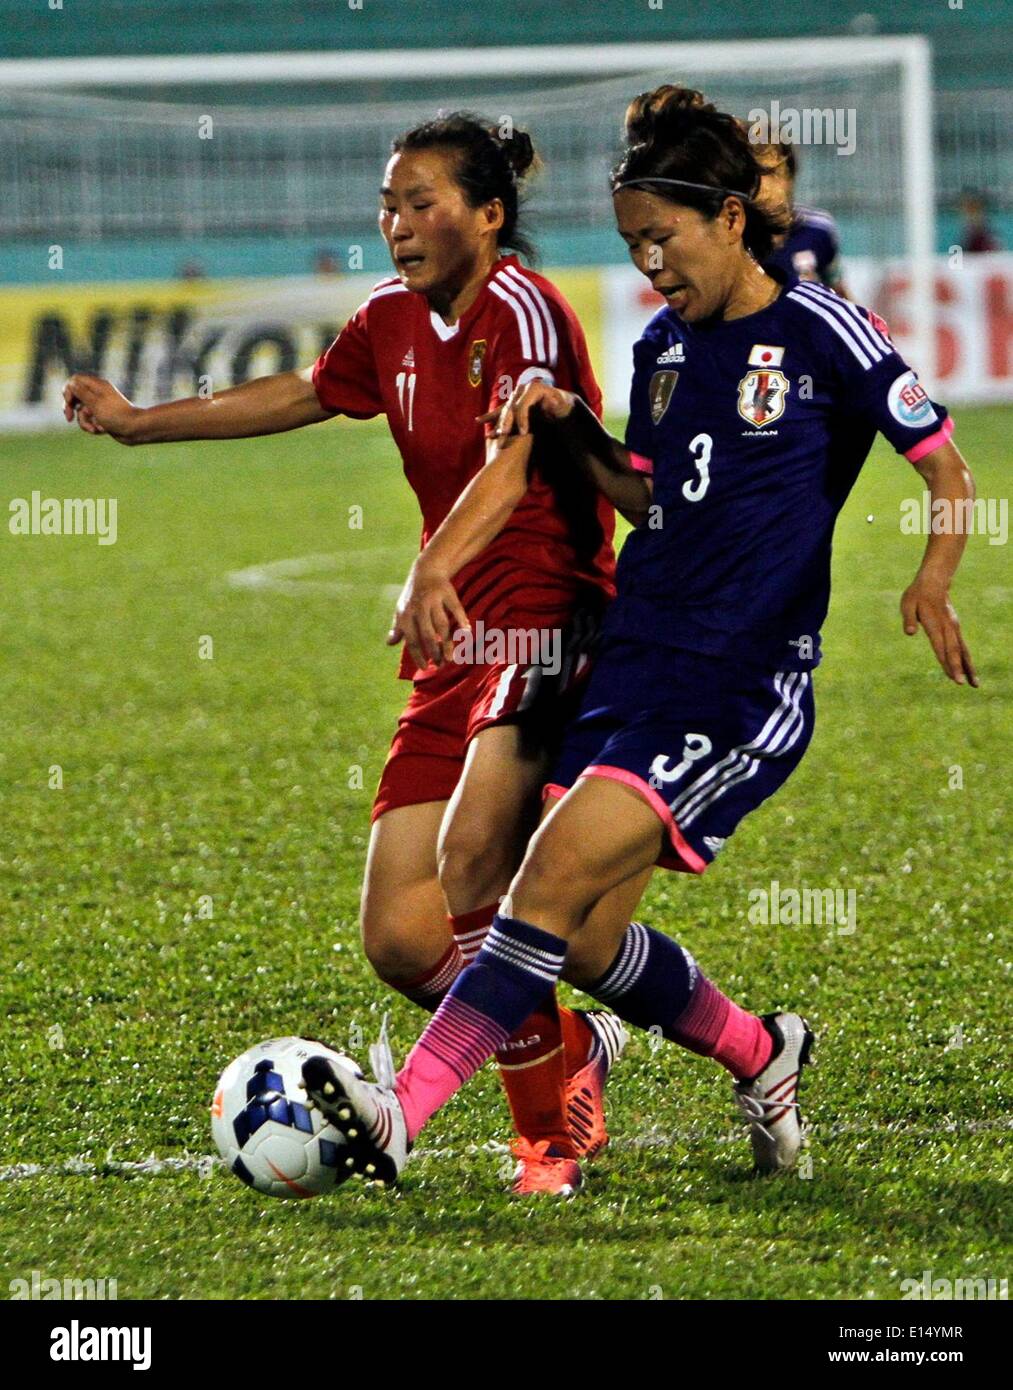 Ho Chi Minh City, Vietnam. 22nd May, 2014. Player Yang Li (L) of China vies for the ball during the semi-final against Japan during the 2014 Asian Football Confederation (AFC) Women's Asian Cup at Thong Nhat Stadium in Ho Chi Minh City, Vietnam, on May 22, 2014. Japan advanced to final after beating China 2-1. © Nguyen Le Huyen/Xinhua/Alamy Live News Stock Photo